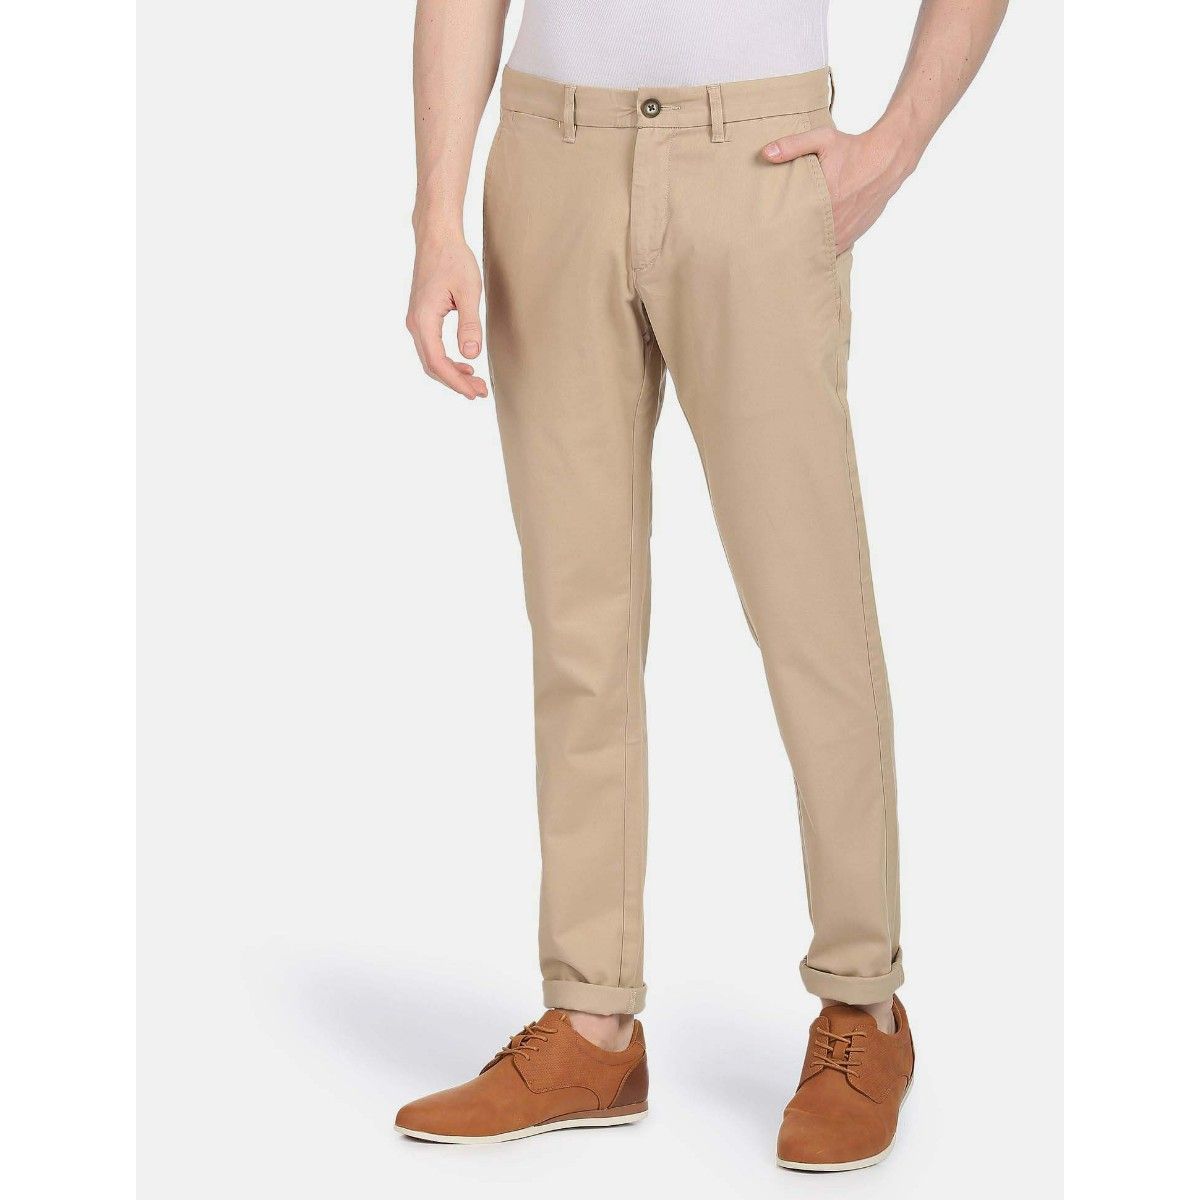 Us Polo Assn Linen Trousers  Buy Us Polo Assn Linen Trousers online  in India